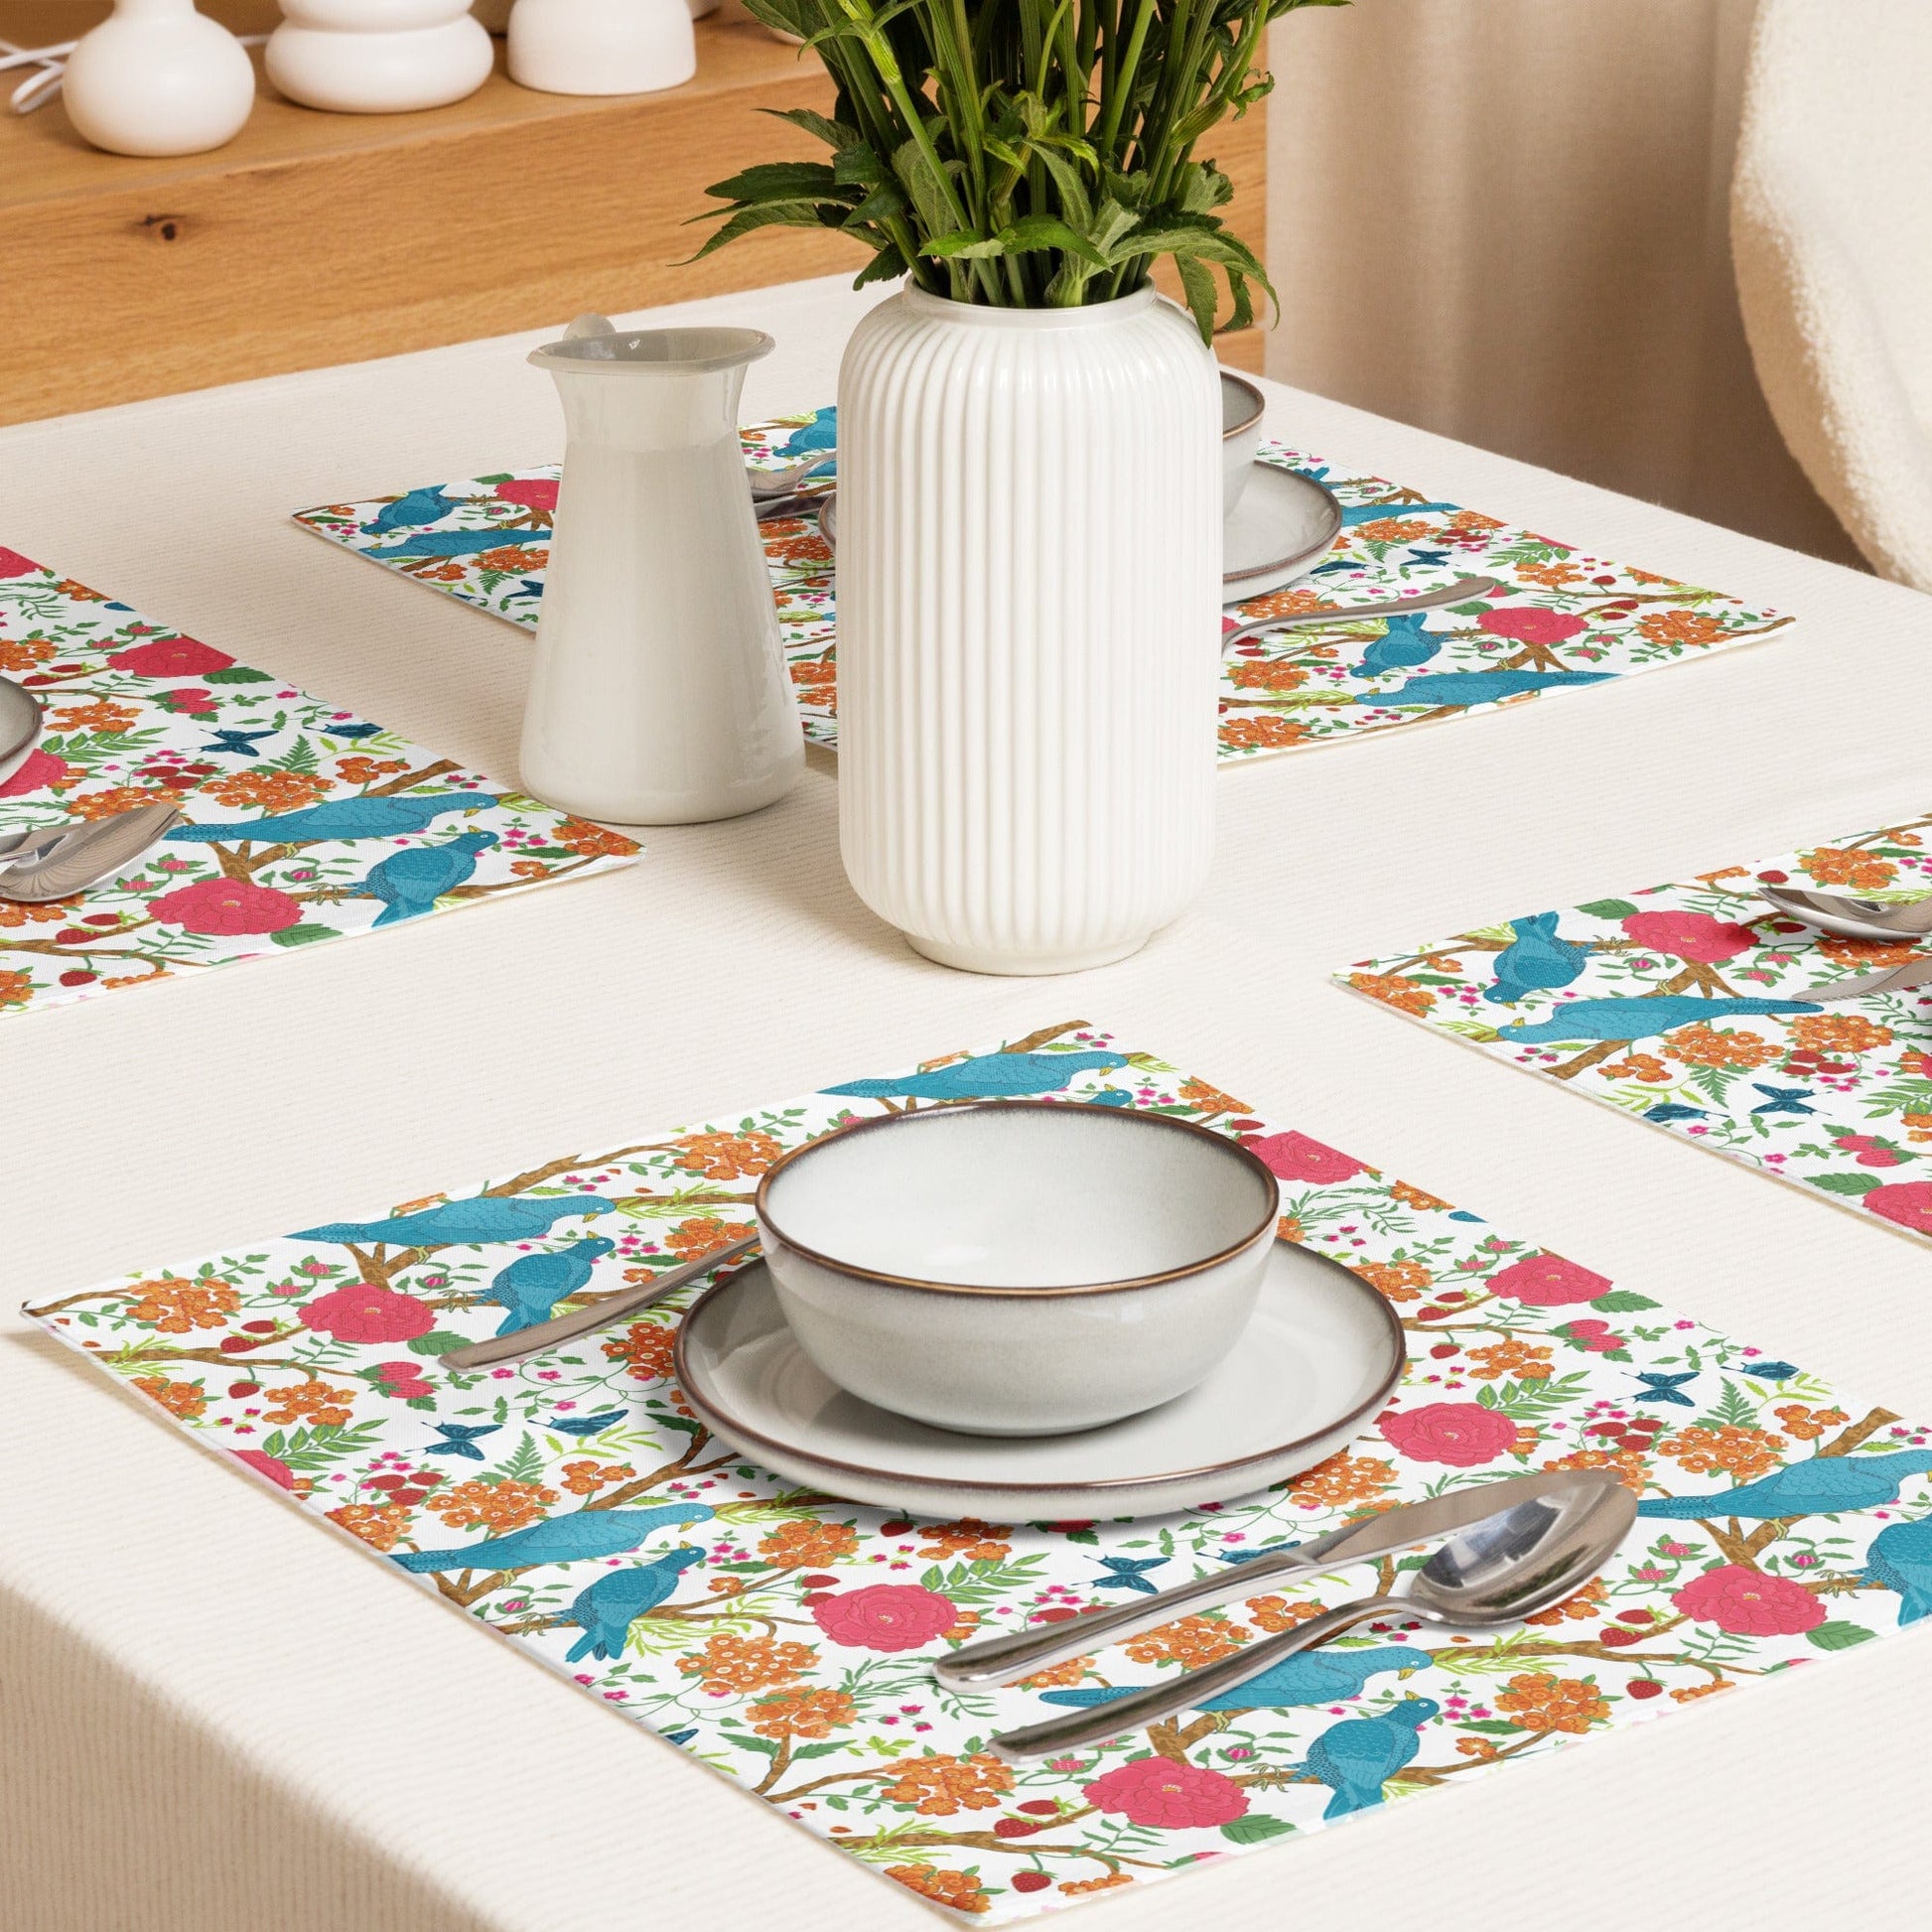 Kate McEnroe New York Set of 4 Chinoiserie Floral and Exotic Bird Botanical Garden Placemats in Pink, Green, Orange and Blue by Kate McEnroe New York - KM13809925 Placemats 9417303_17484